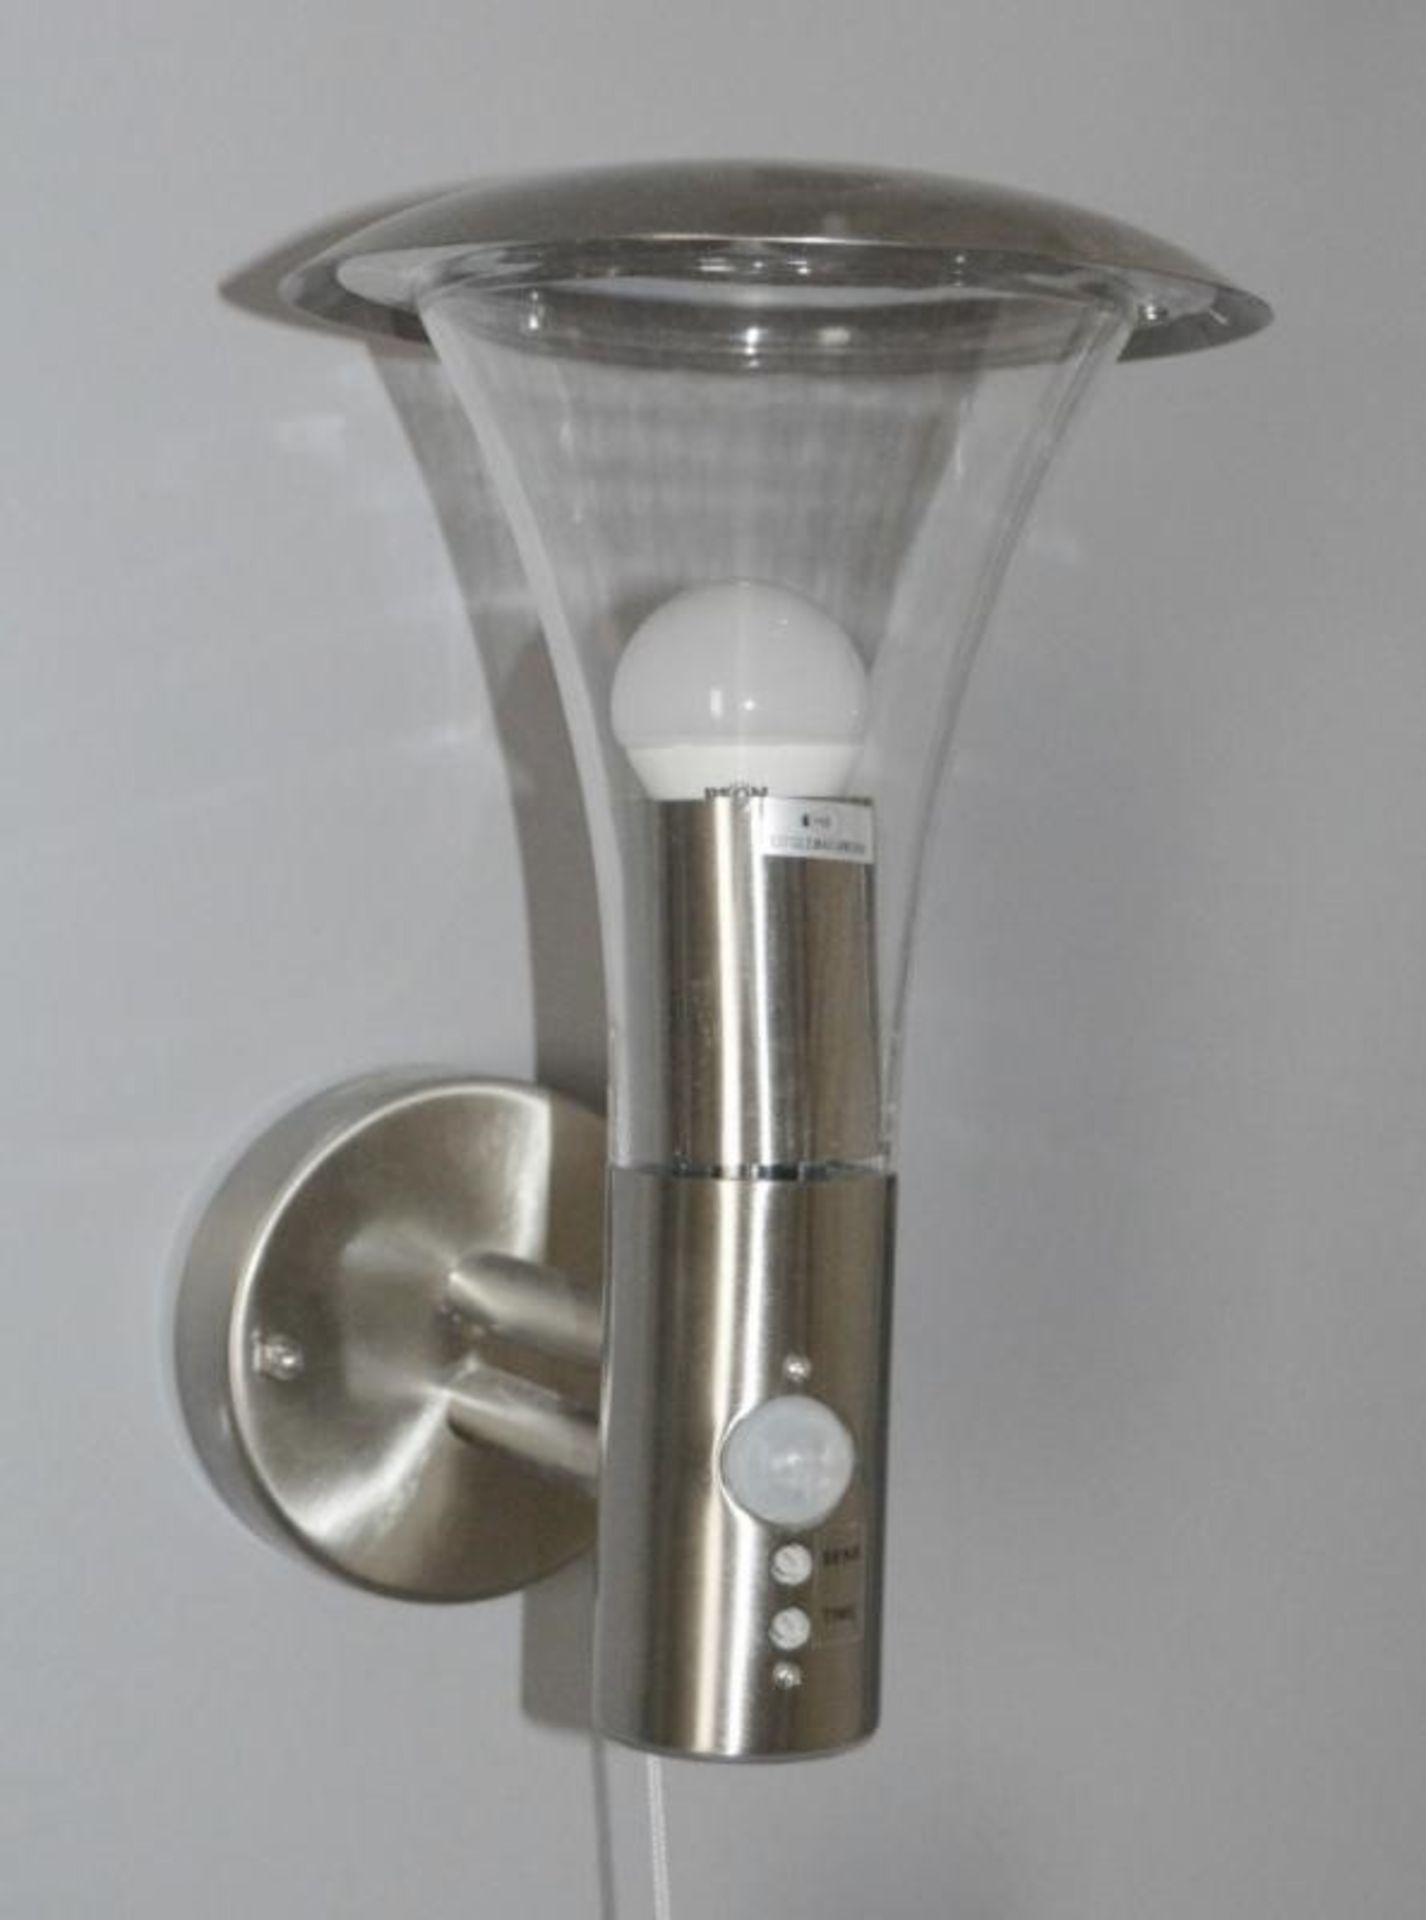 1 x STRAND IP44 Stainless Steel Outdoor Wall Light With Clear Polycarbonate Diffuser And Motion Sens - Image 2 of 4